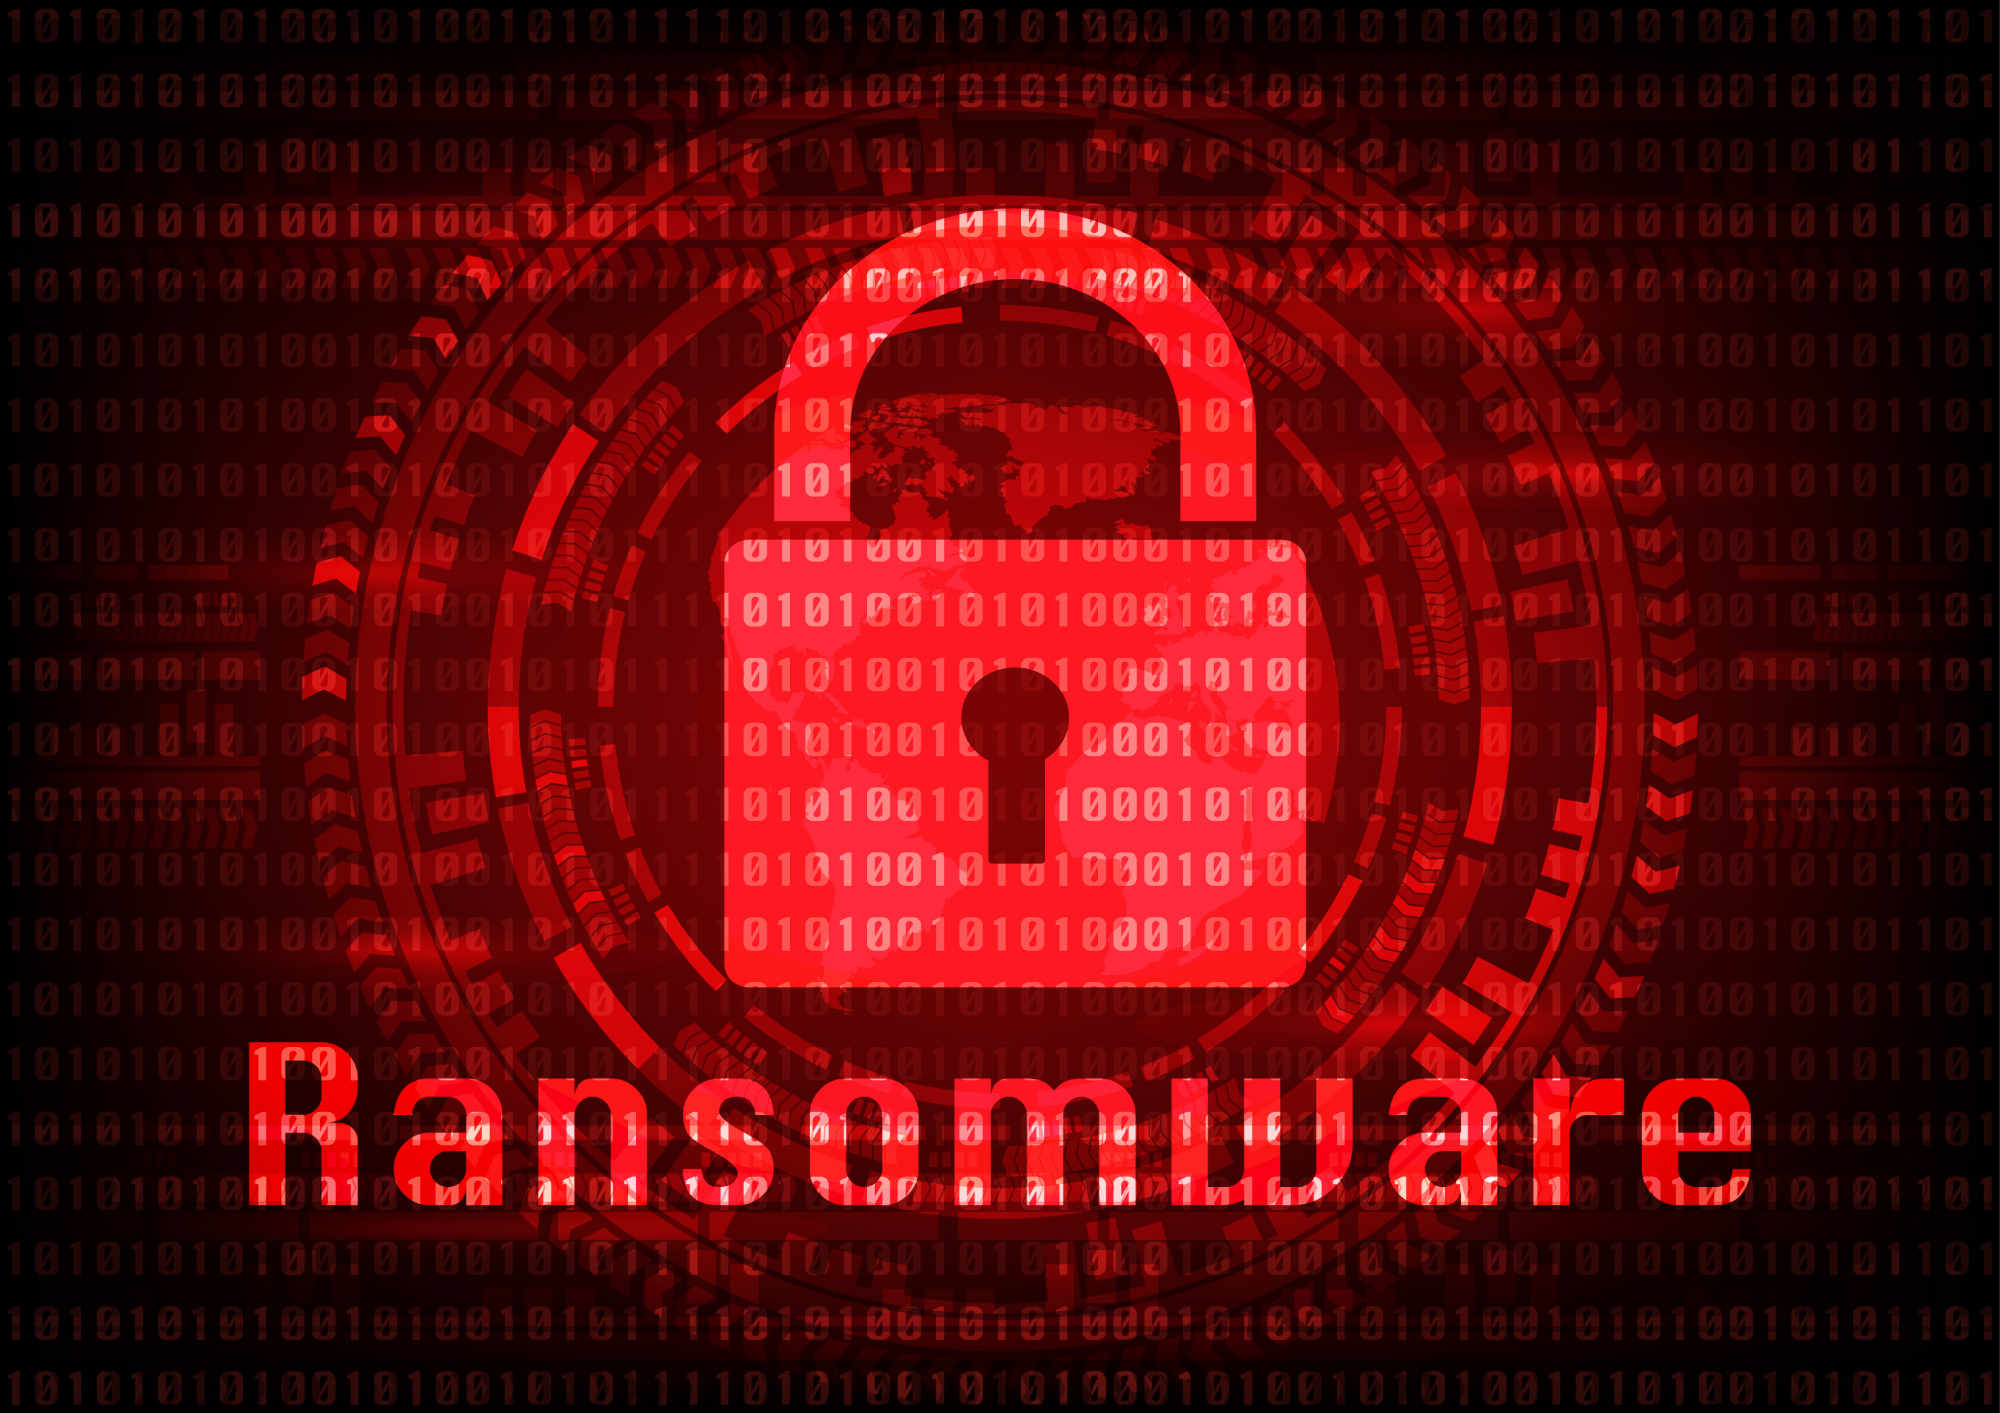 How the Healthcare Industry Can Prepare for Ransomware 2.0